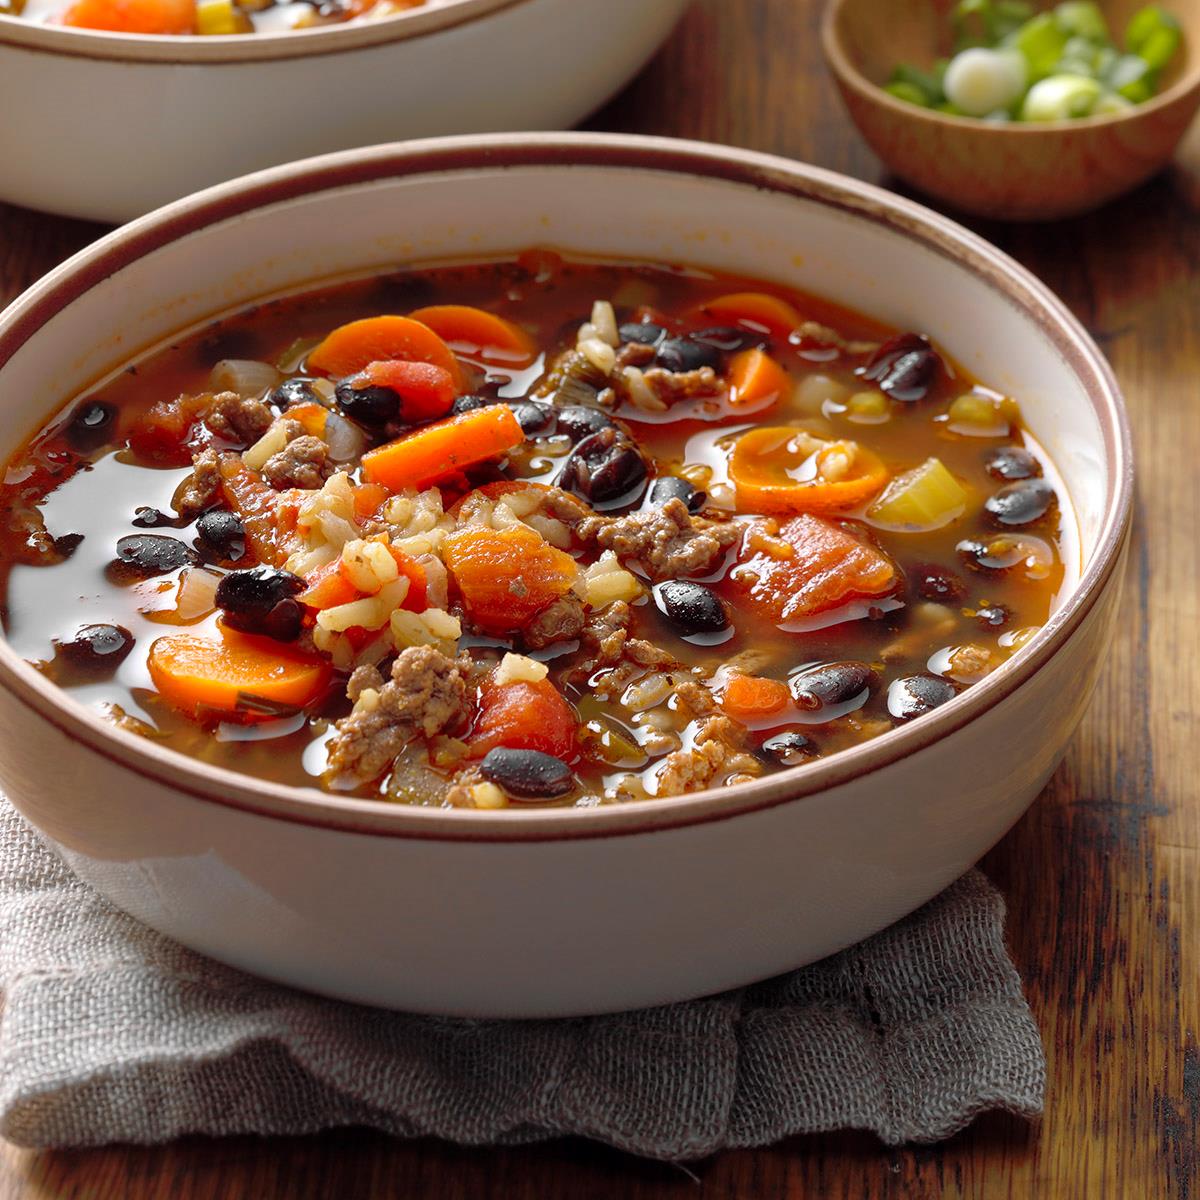 Texas Black Bean Soup Recipe: How to Make It | Taste of Home